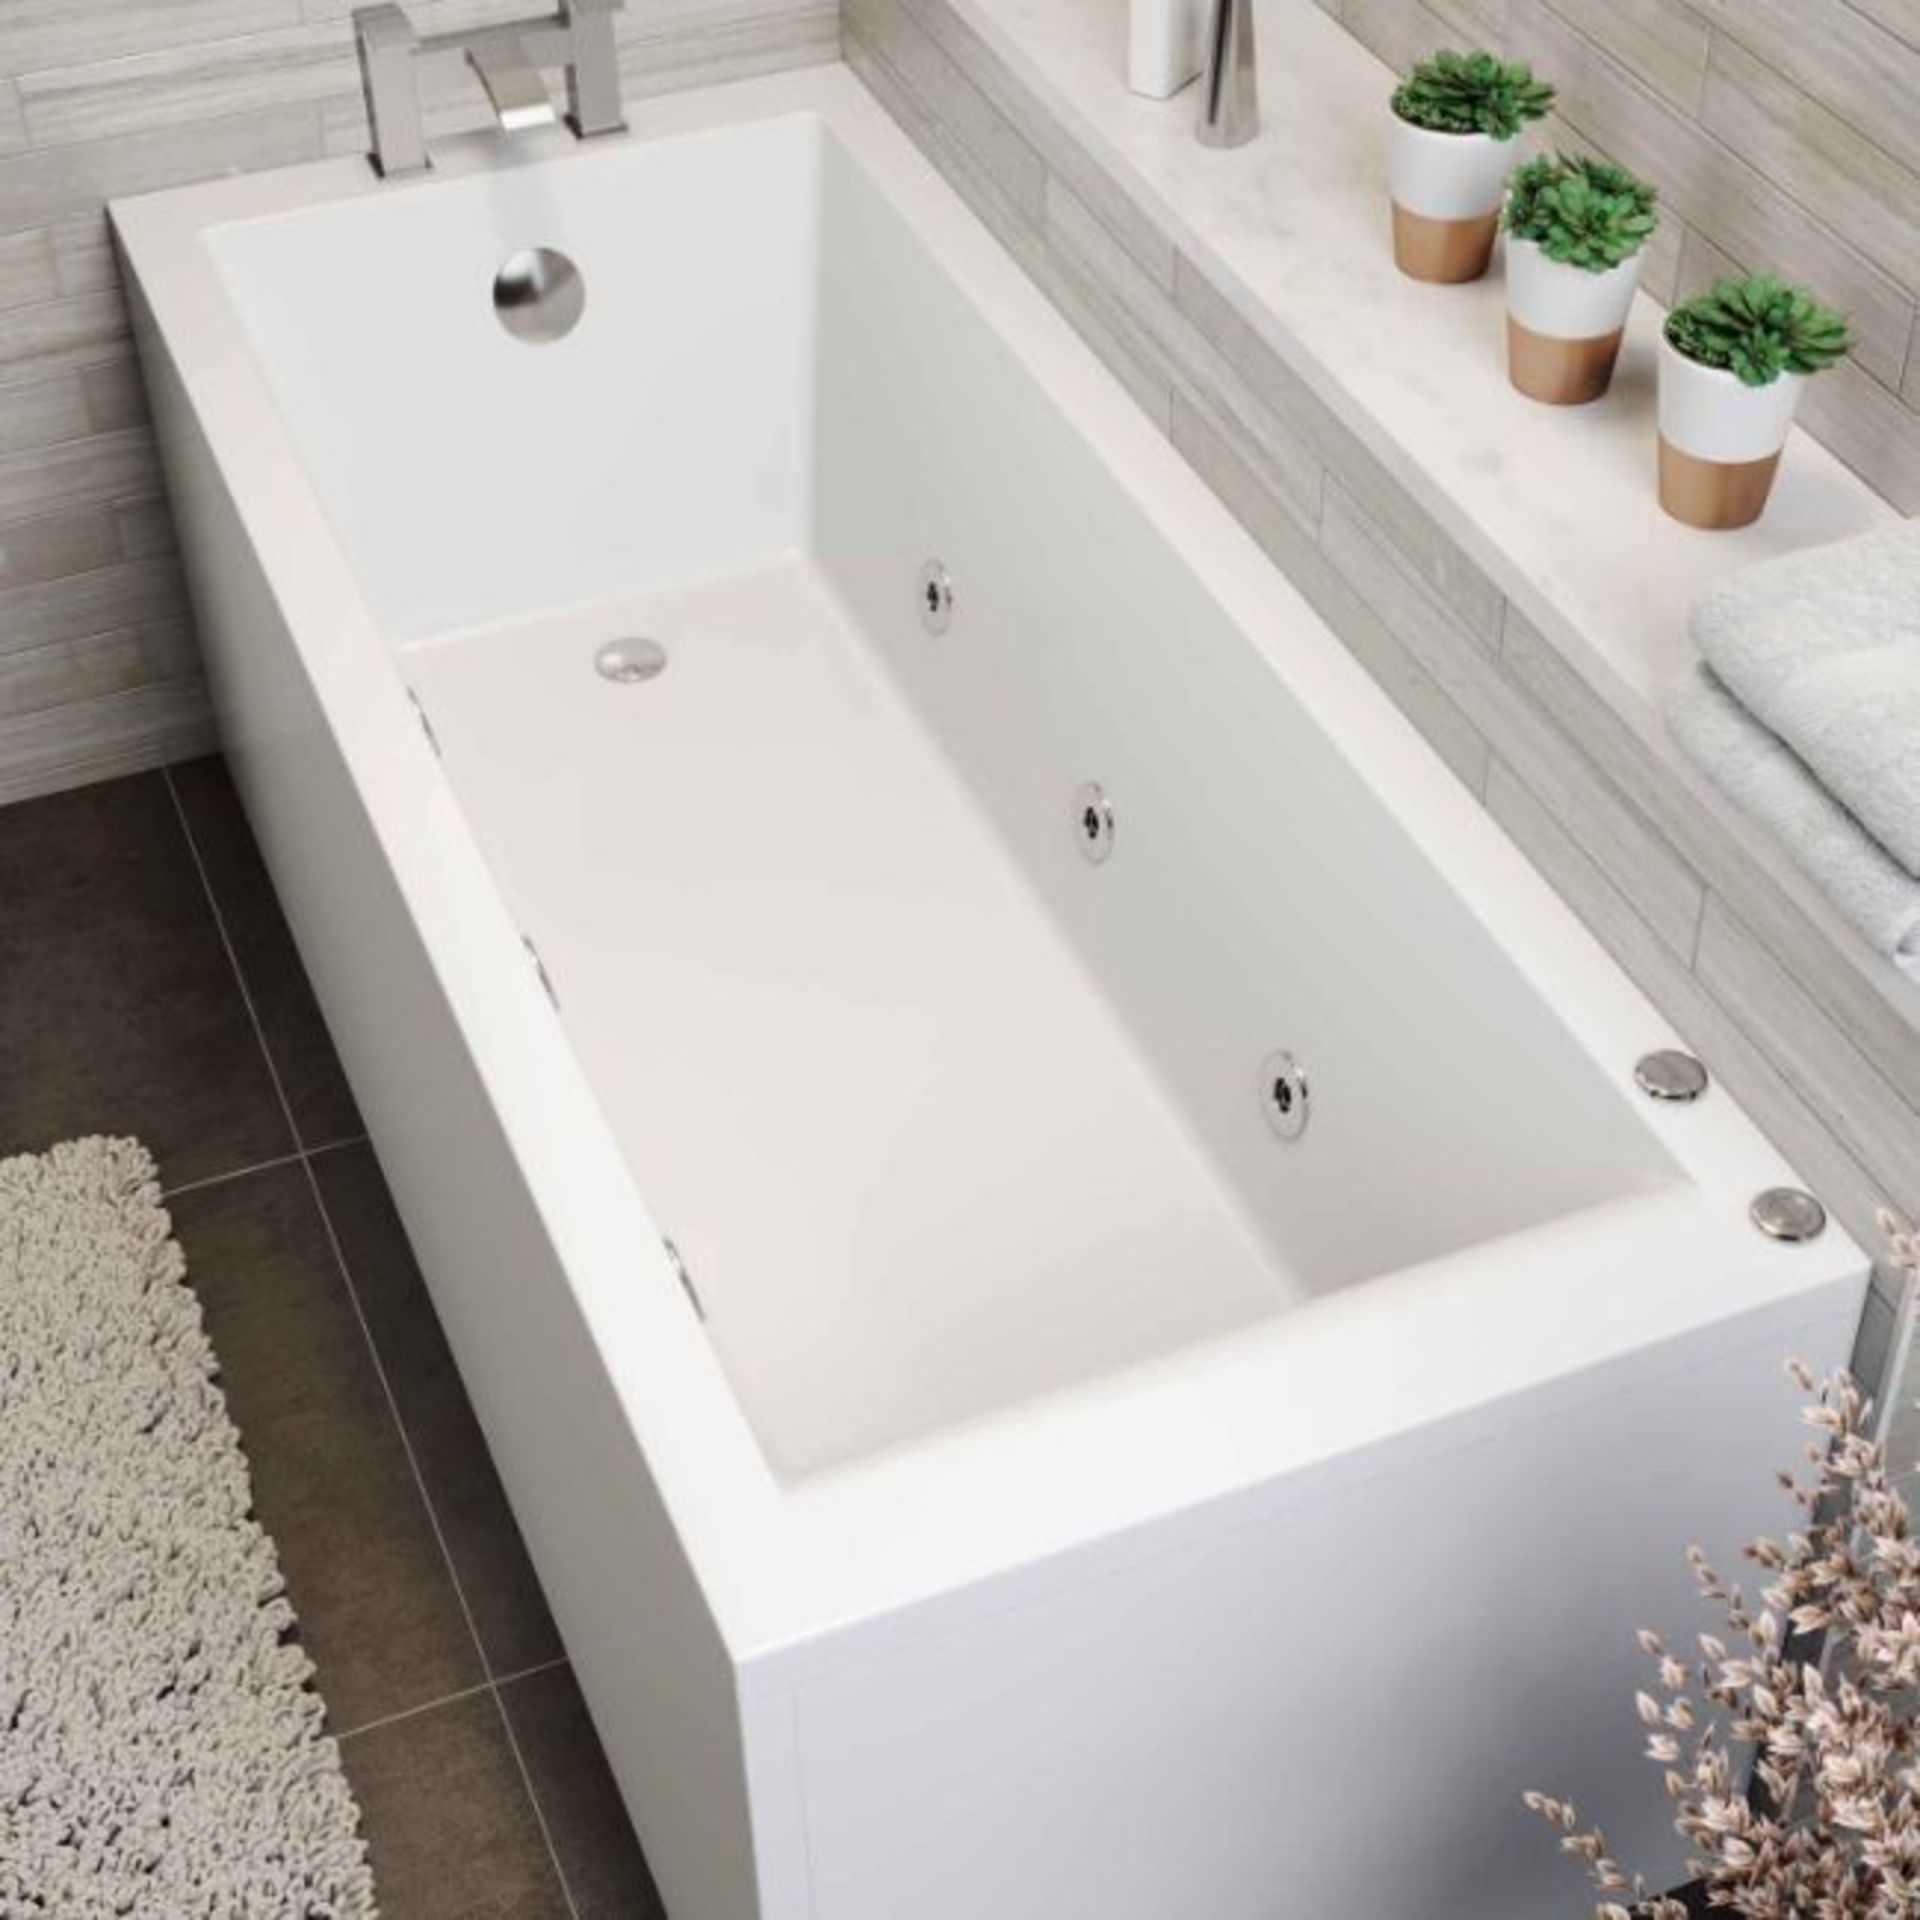 New 1700x700x545mm Whirlpool Jacuzzi Single Ended Bath - 6 Jets. RRP £1,299.99.Spa Experience... New - Image 2 of 2